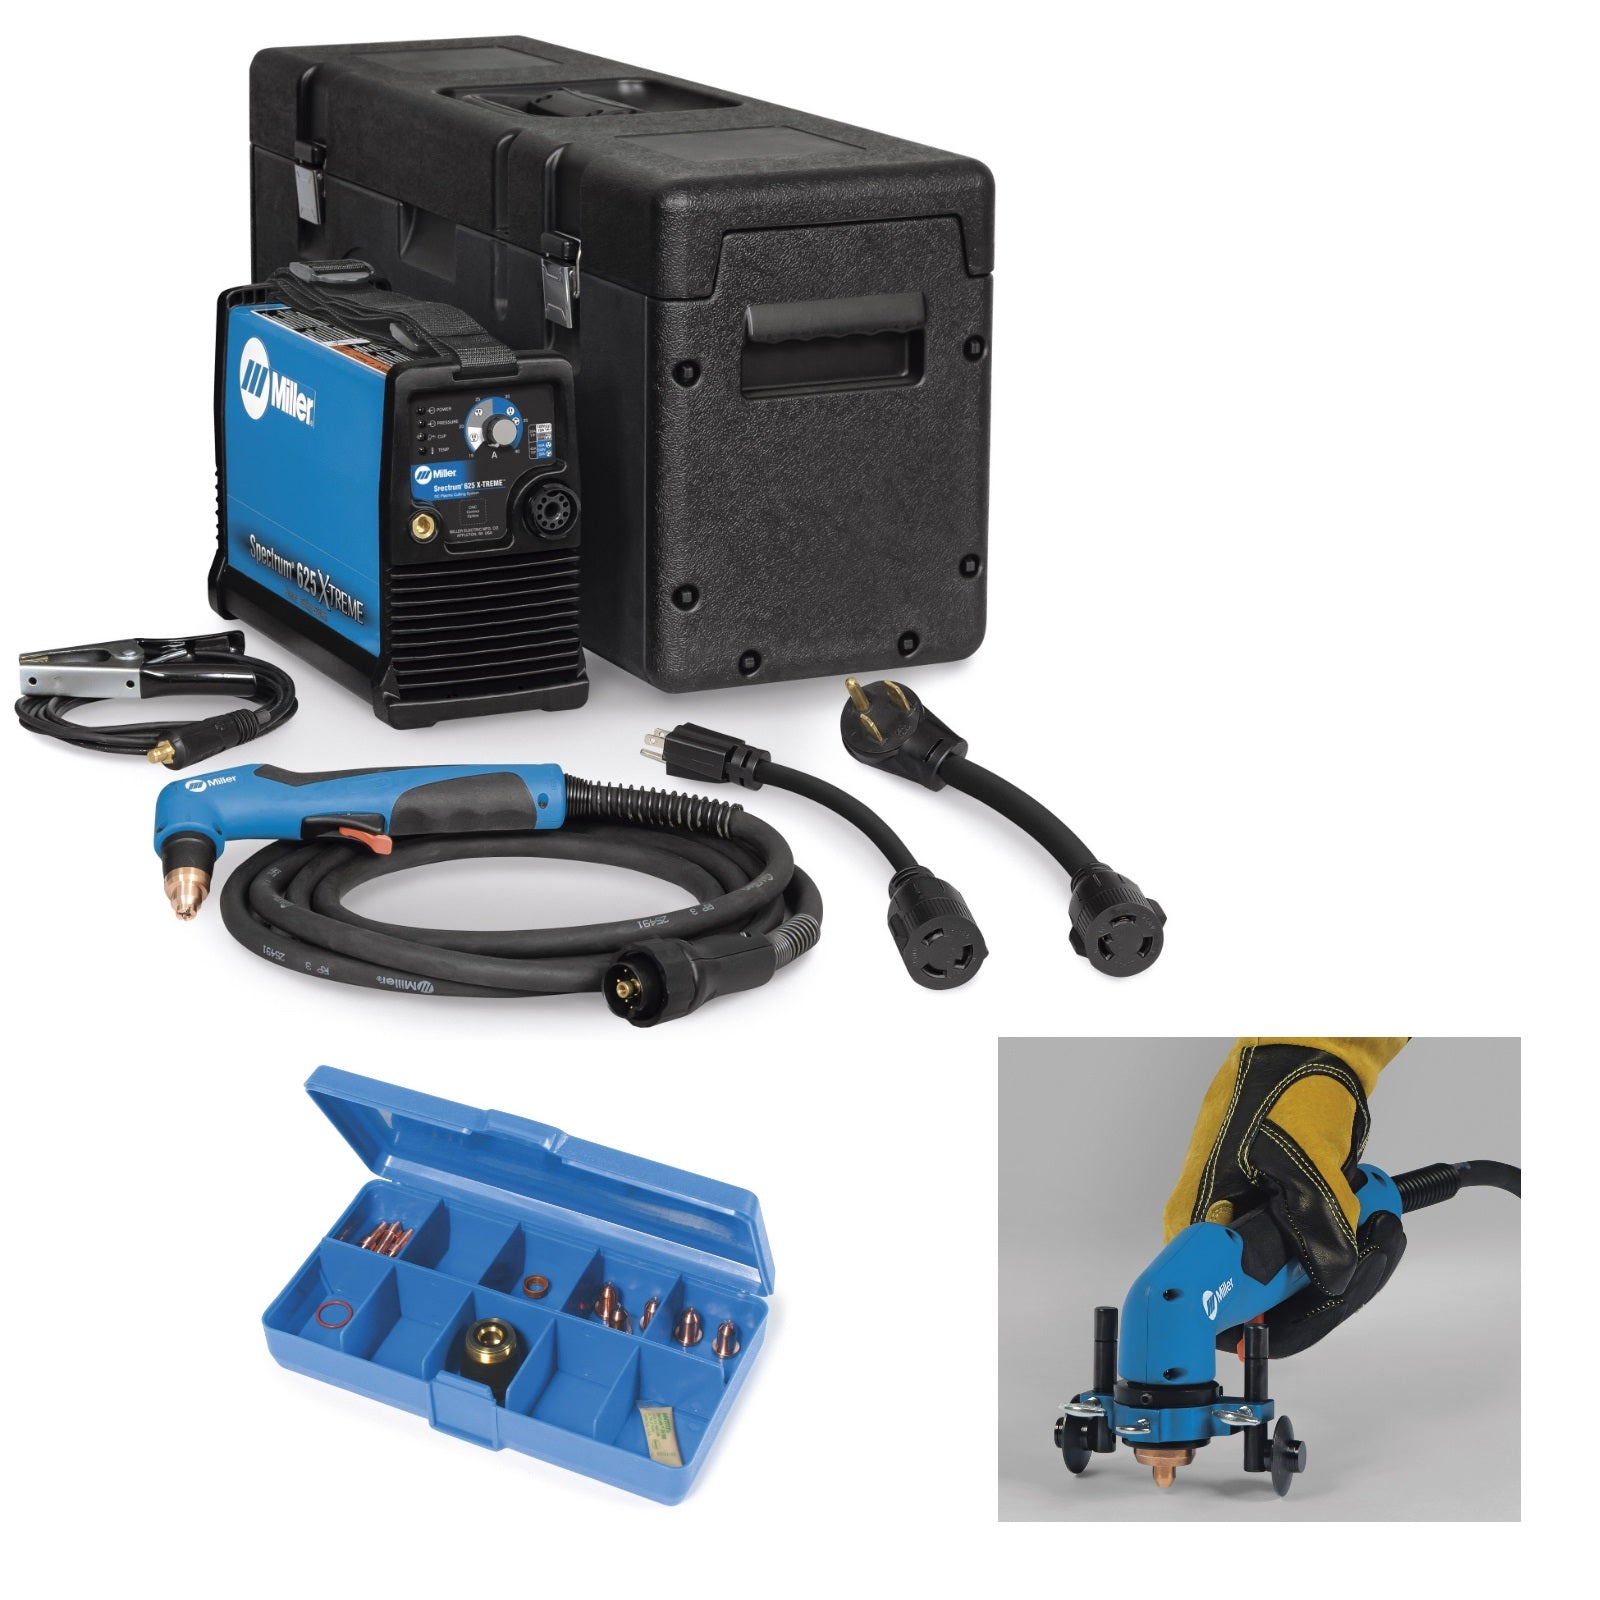 Miller Spectrum 625 X-Treme Plasma Cutter with 20 ft. Torch (907579001), Consumables and Roller Guide